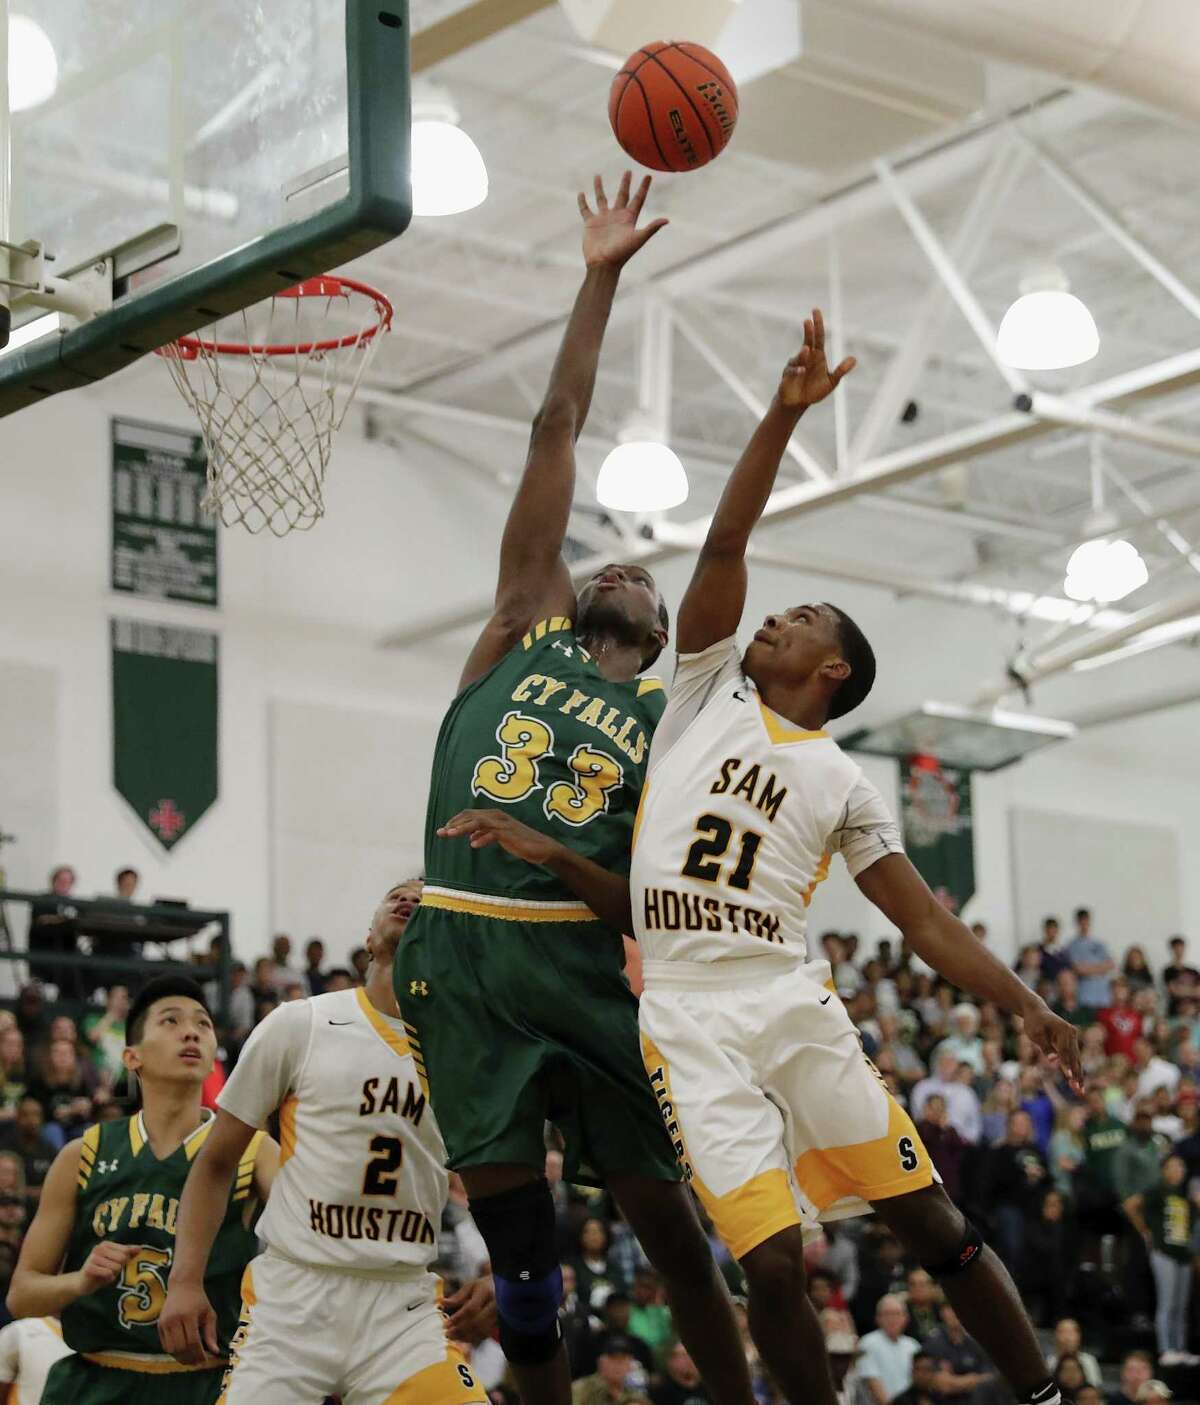 Houston Cy Falls’ Deshang Weaver (33) blocks a shot by Sam Houston’s Anthony Fletcher (21) during the first half of the 6A Region III playoff game at Strake Jesuit High School in Houston on Feb. 28, 2017.